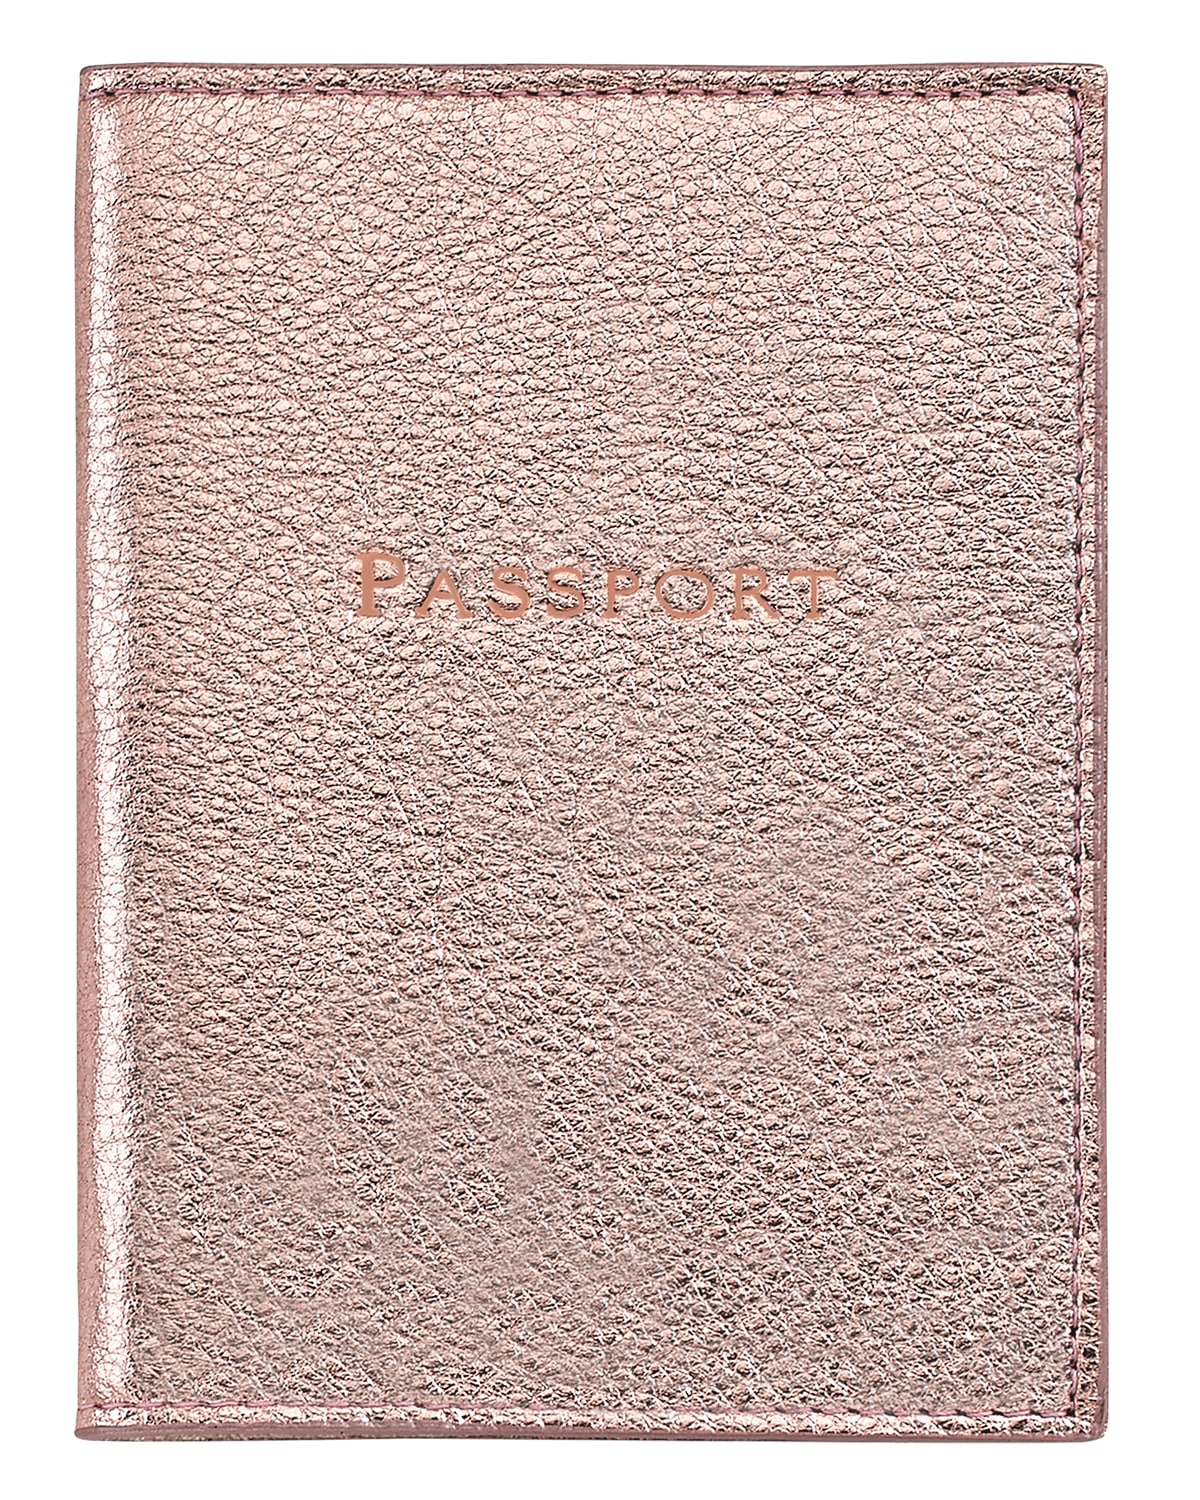 Graphic Image Passport Cover In Rosegold